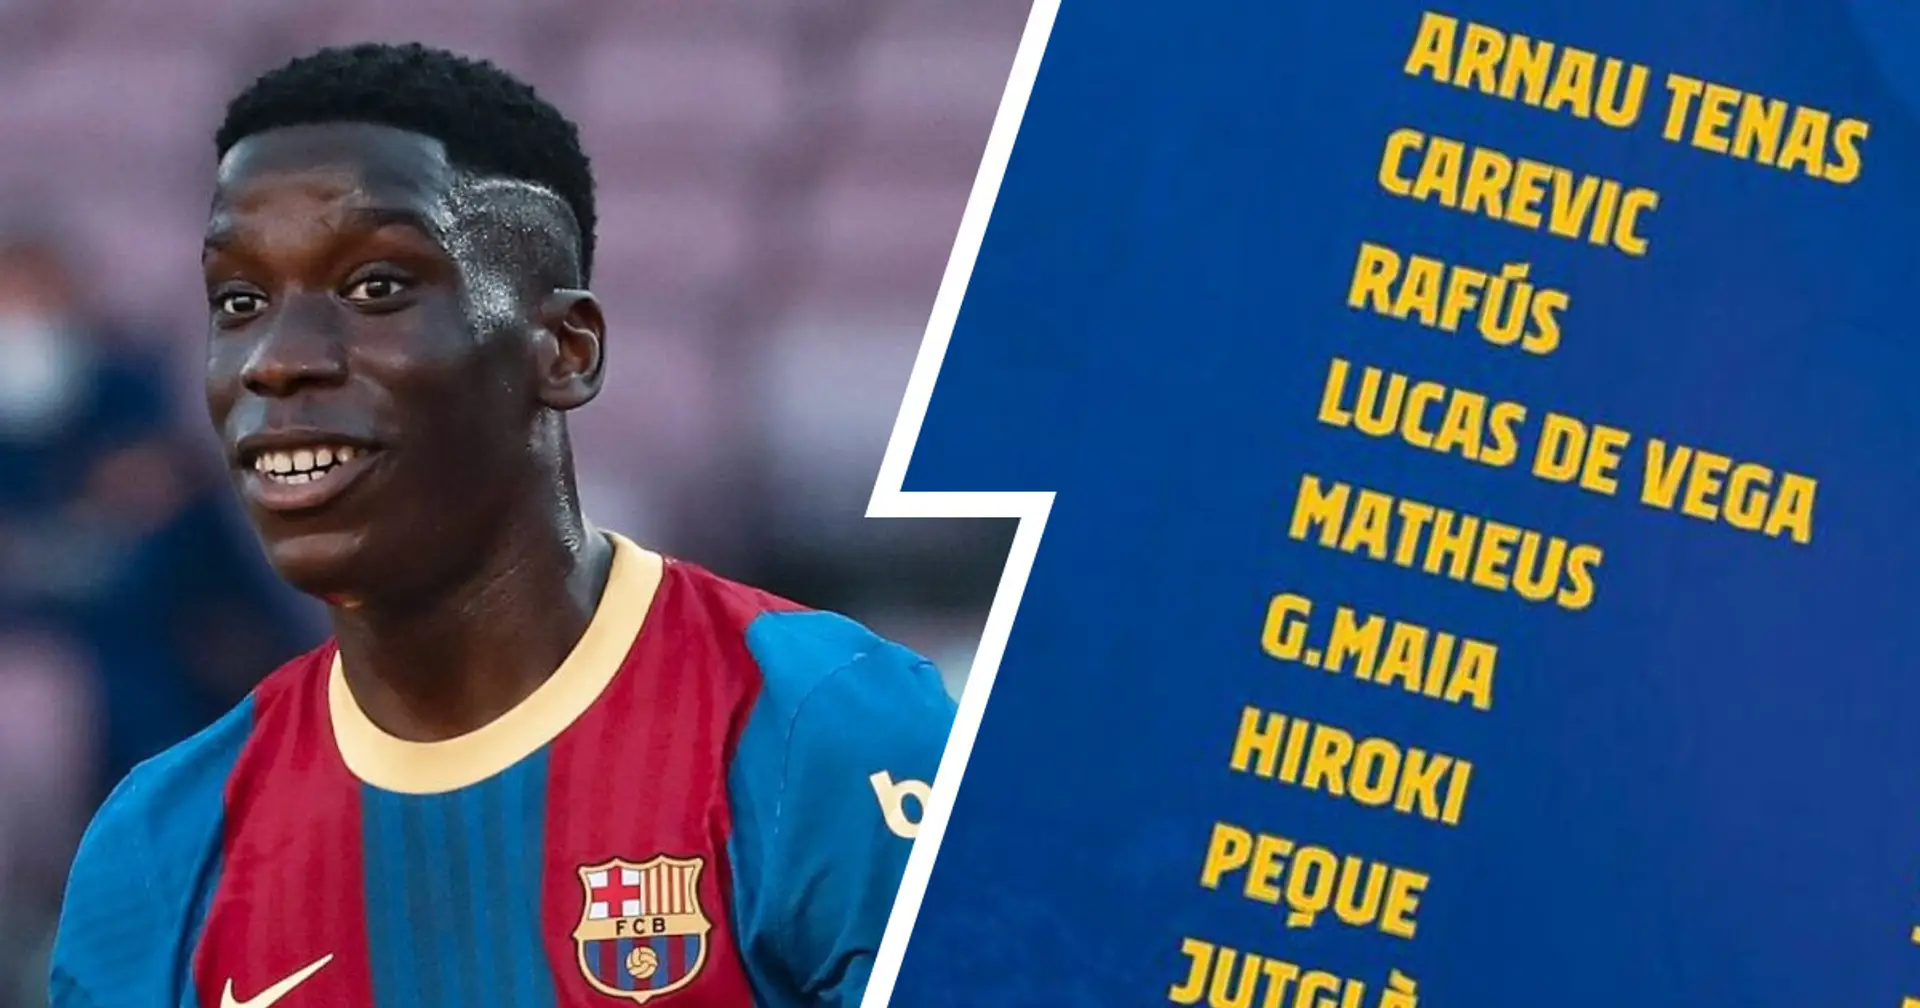 Ilaix Moriba left out of Barca B's squad for friendly with contract situation unresolved